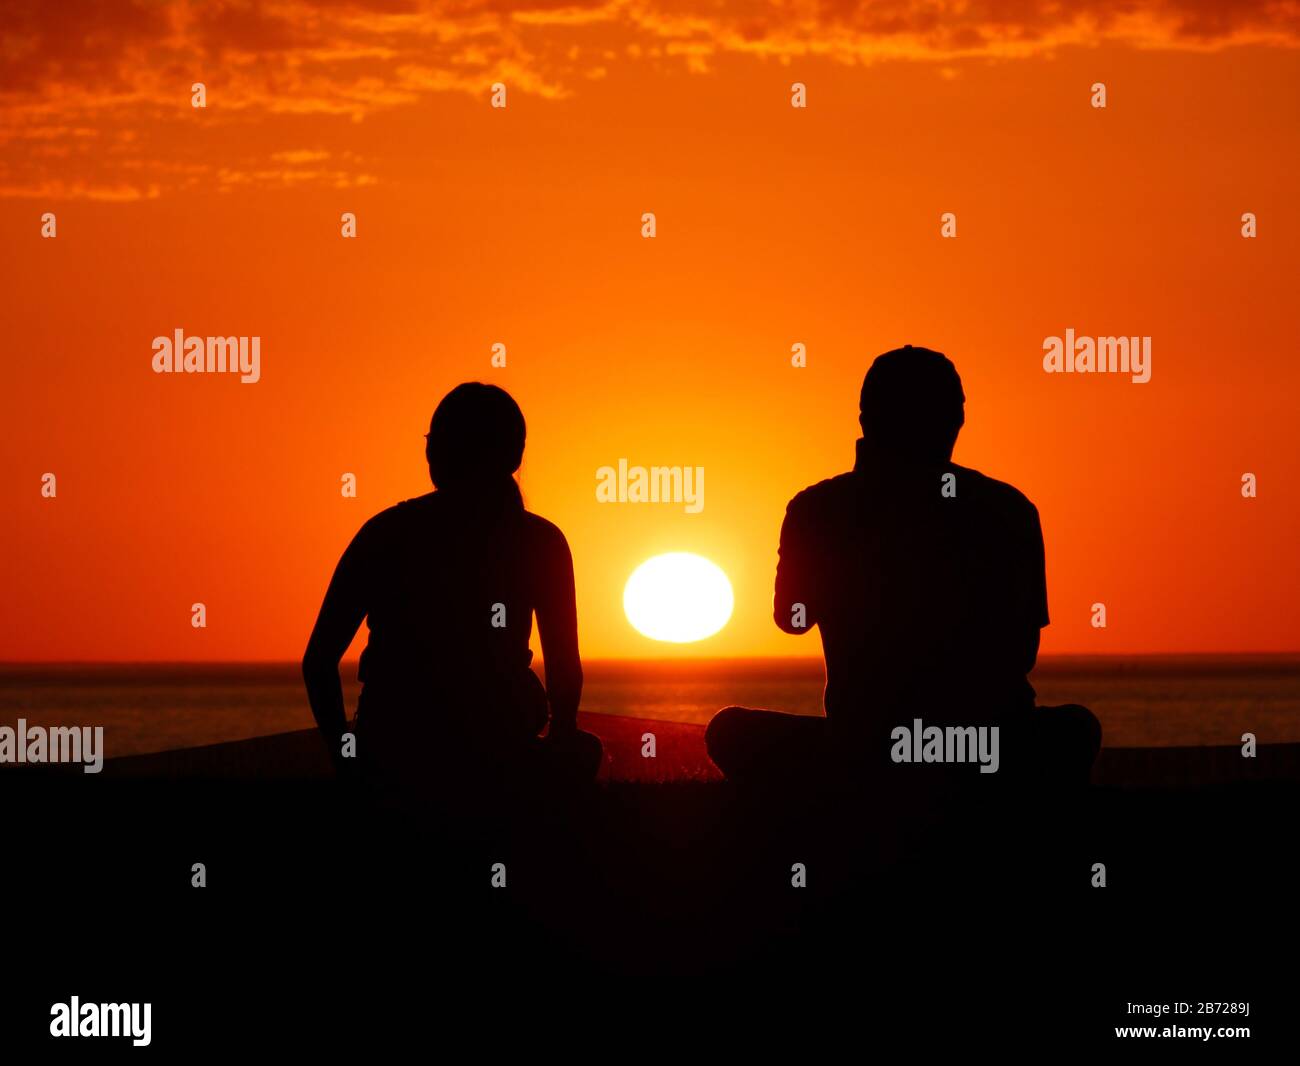 couple silhouettes in front of beautiful orange sunset with clouds Stock Photo